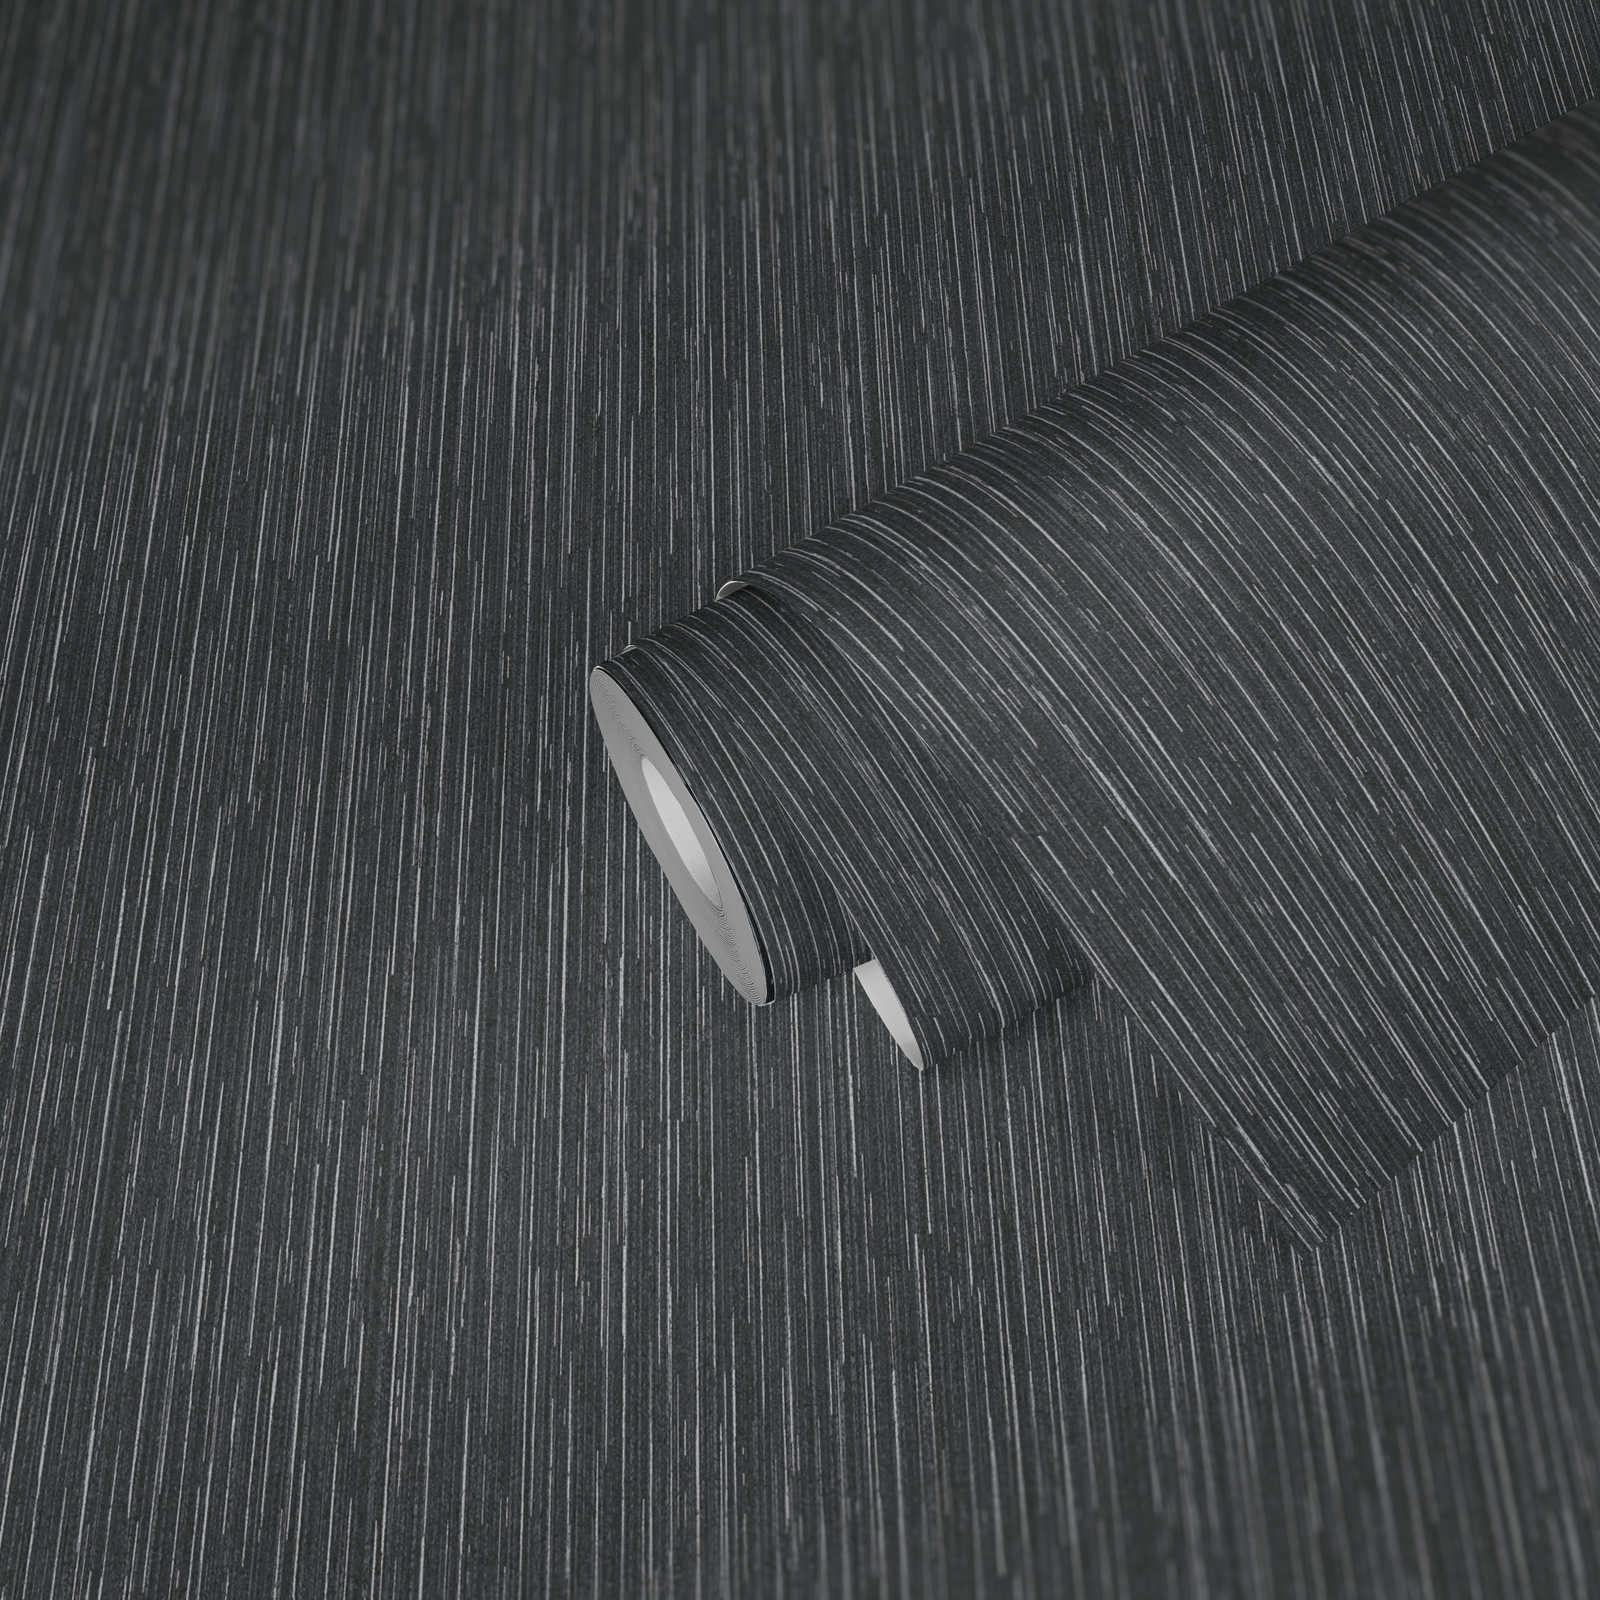             Anthracite wallpaper with silver accents & line design - black, metallic
        